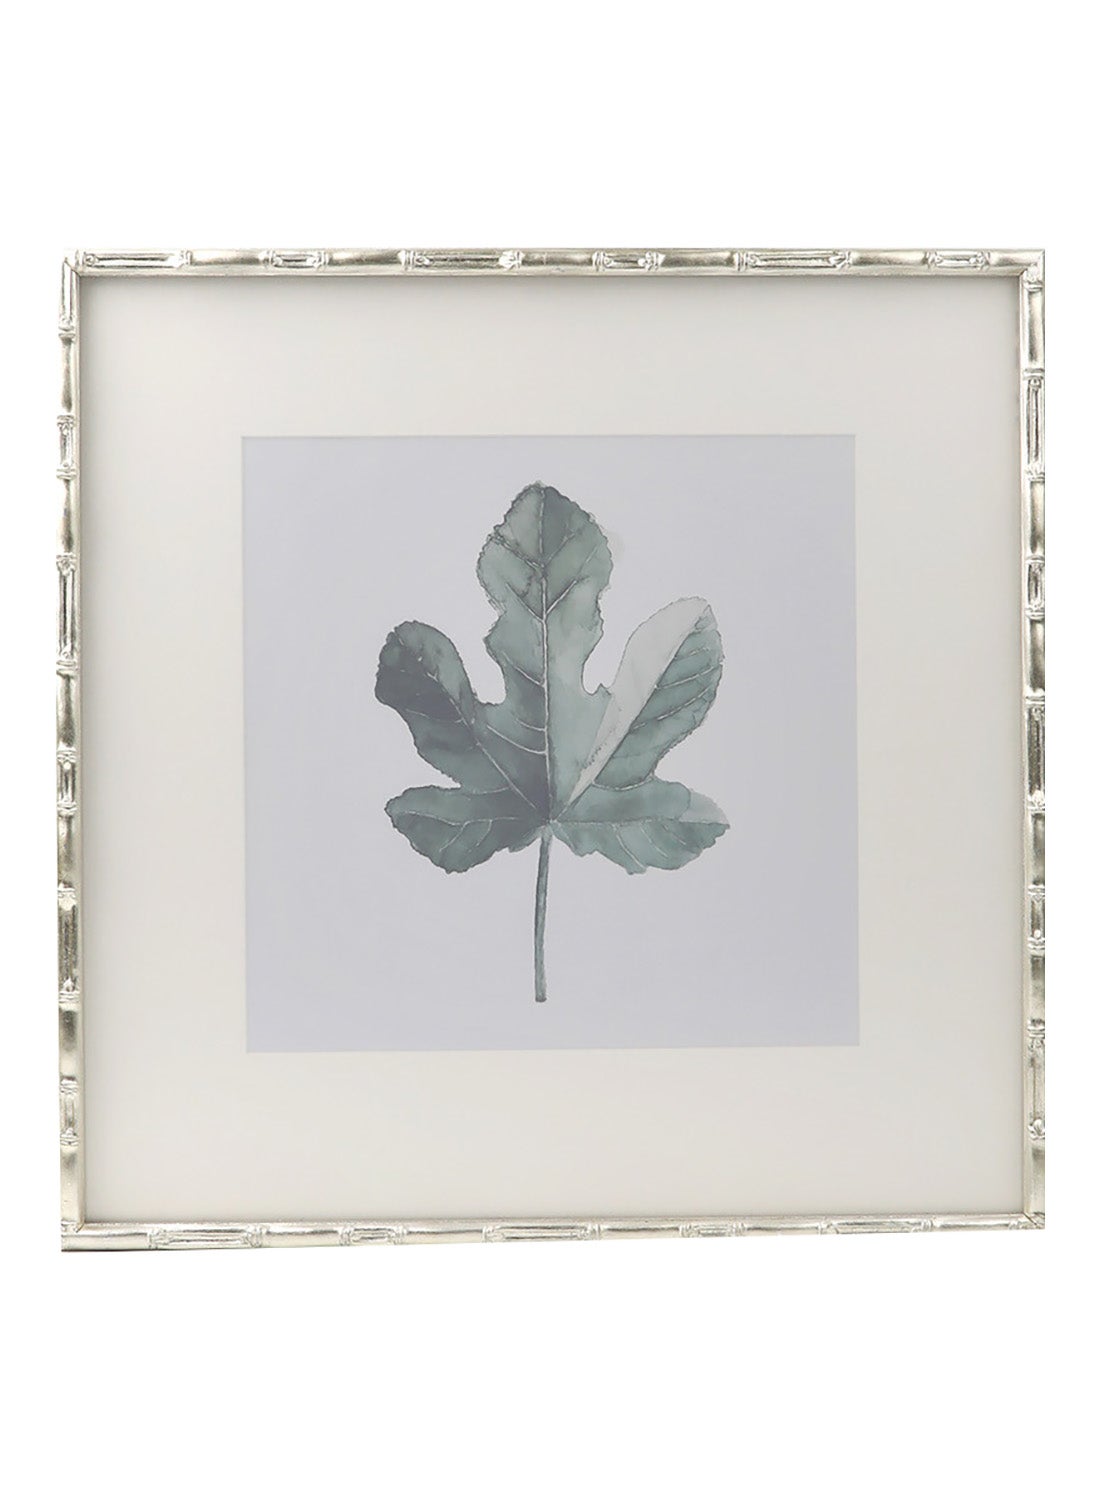 Perfect Design Wall Frames Silver/White With Outer Frame Size L40xH40 cm And Photo Size 10x10 inch, Or 38x38cm 